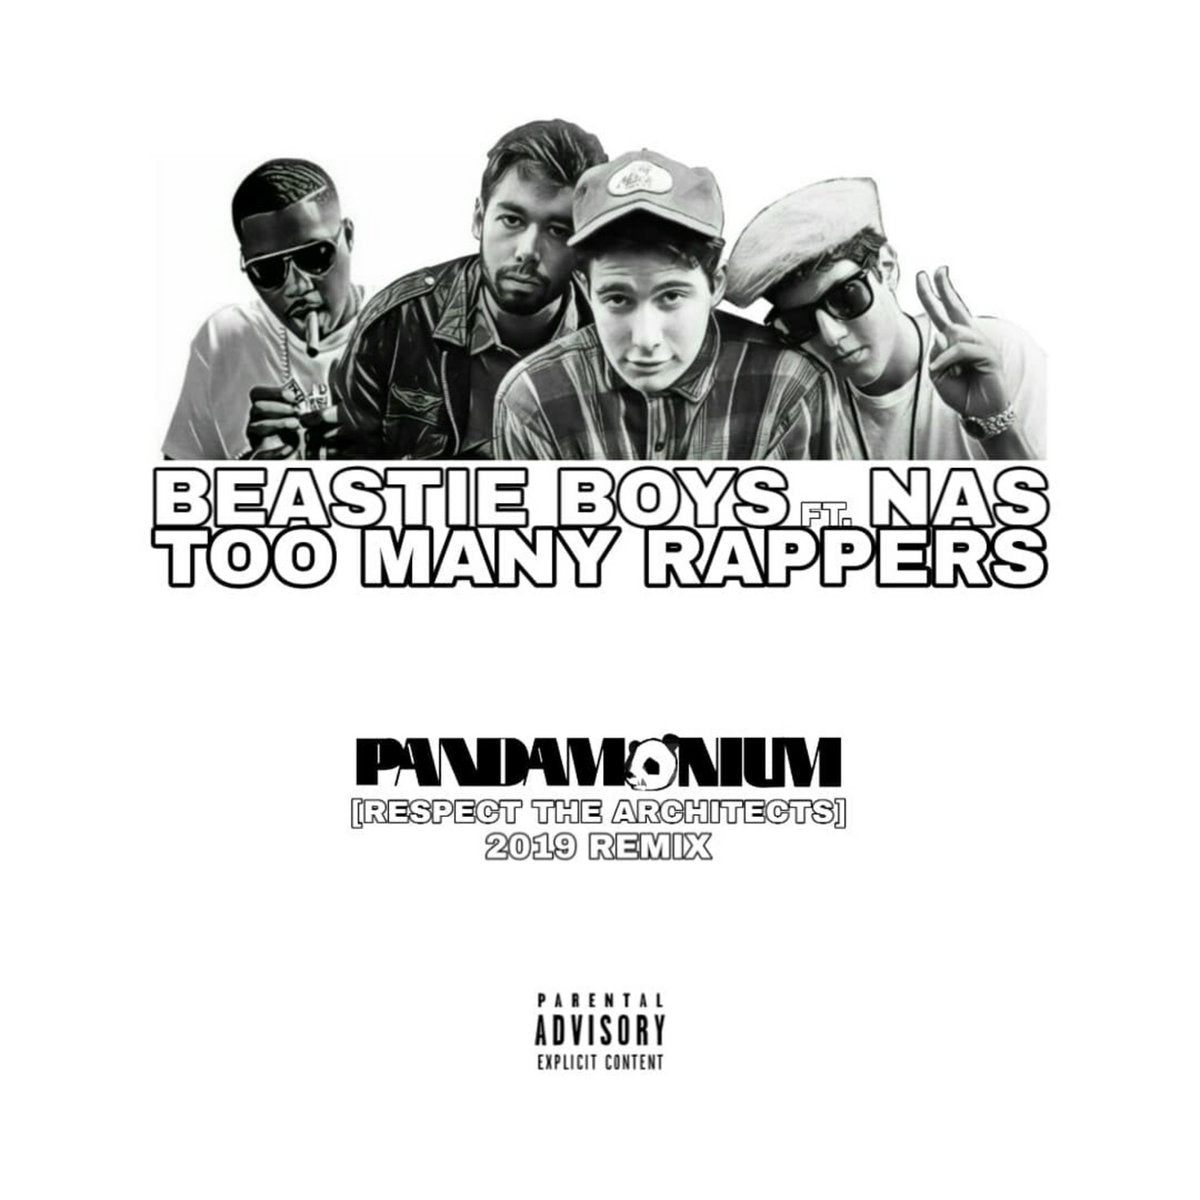 BEASTIE BOYS - TOO MANY RAPPERS